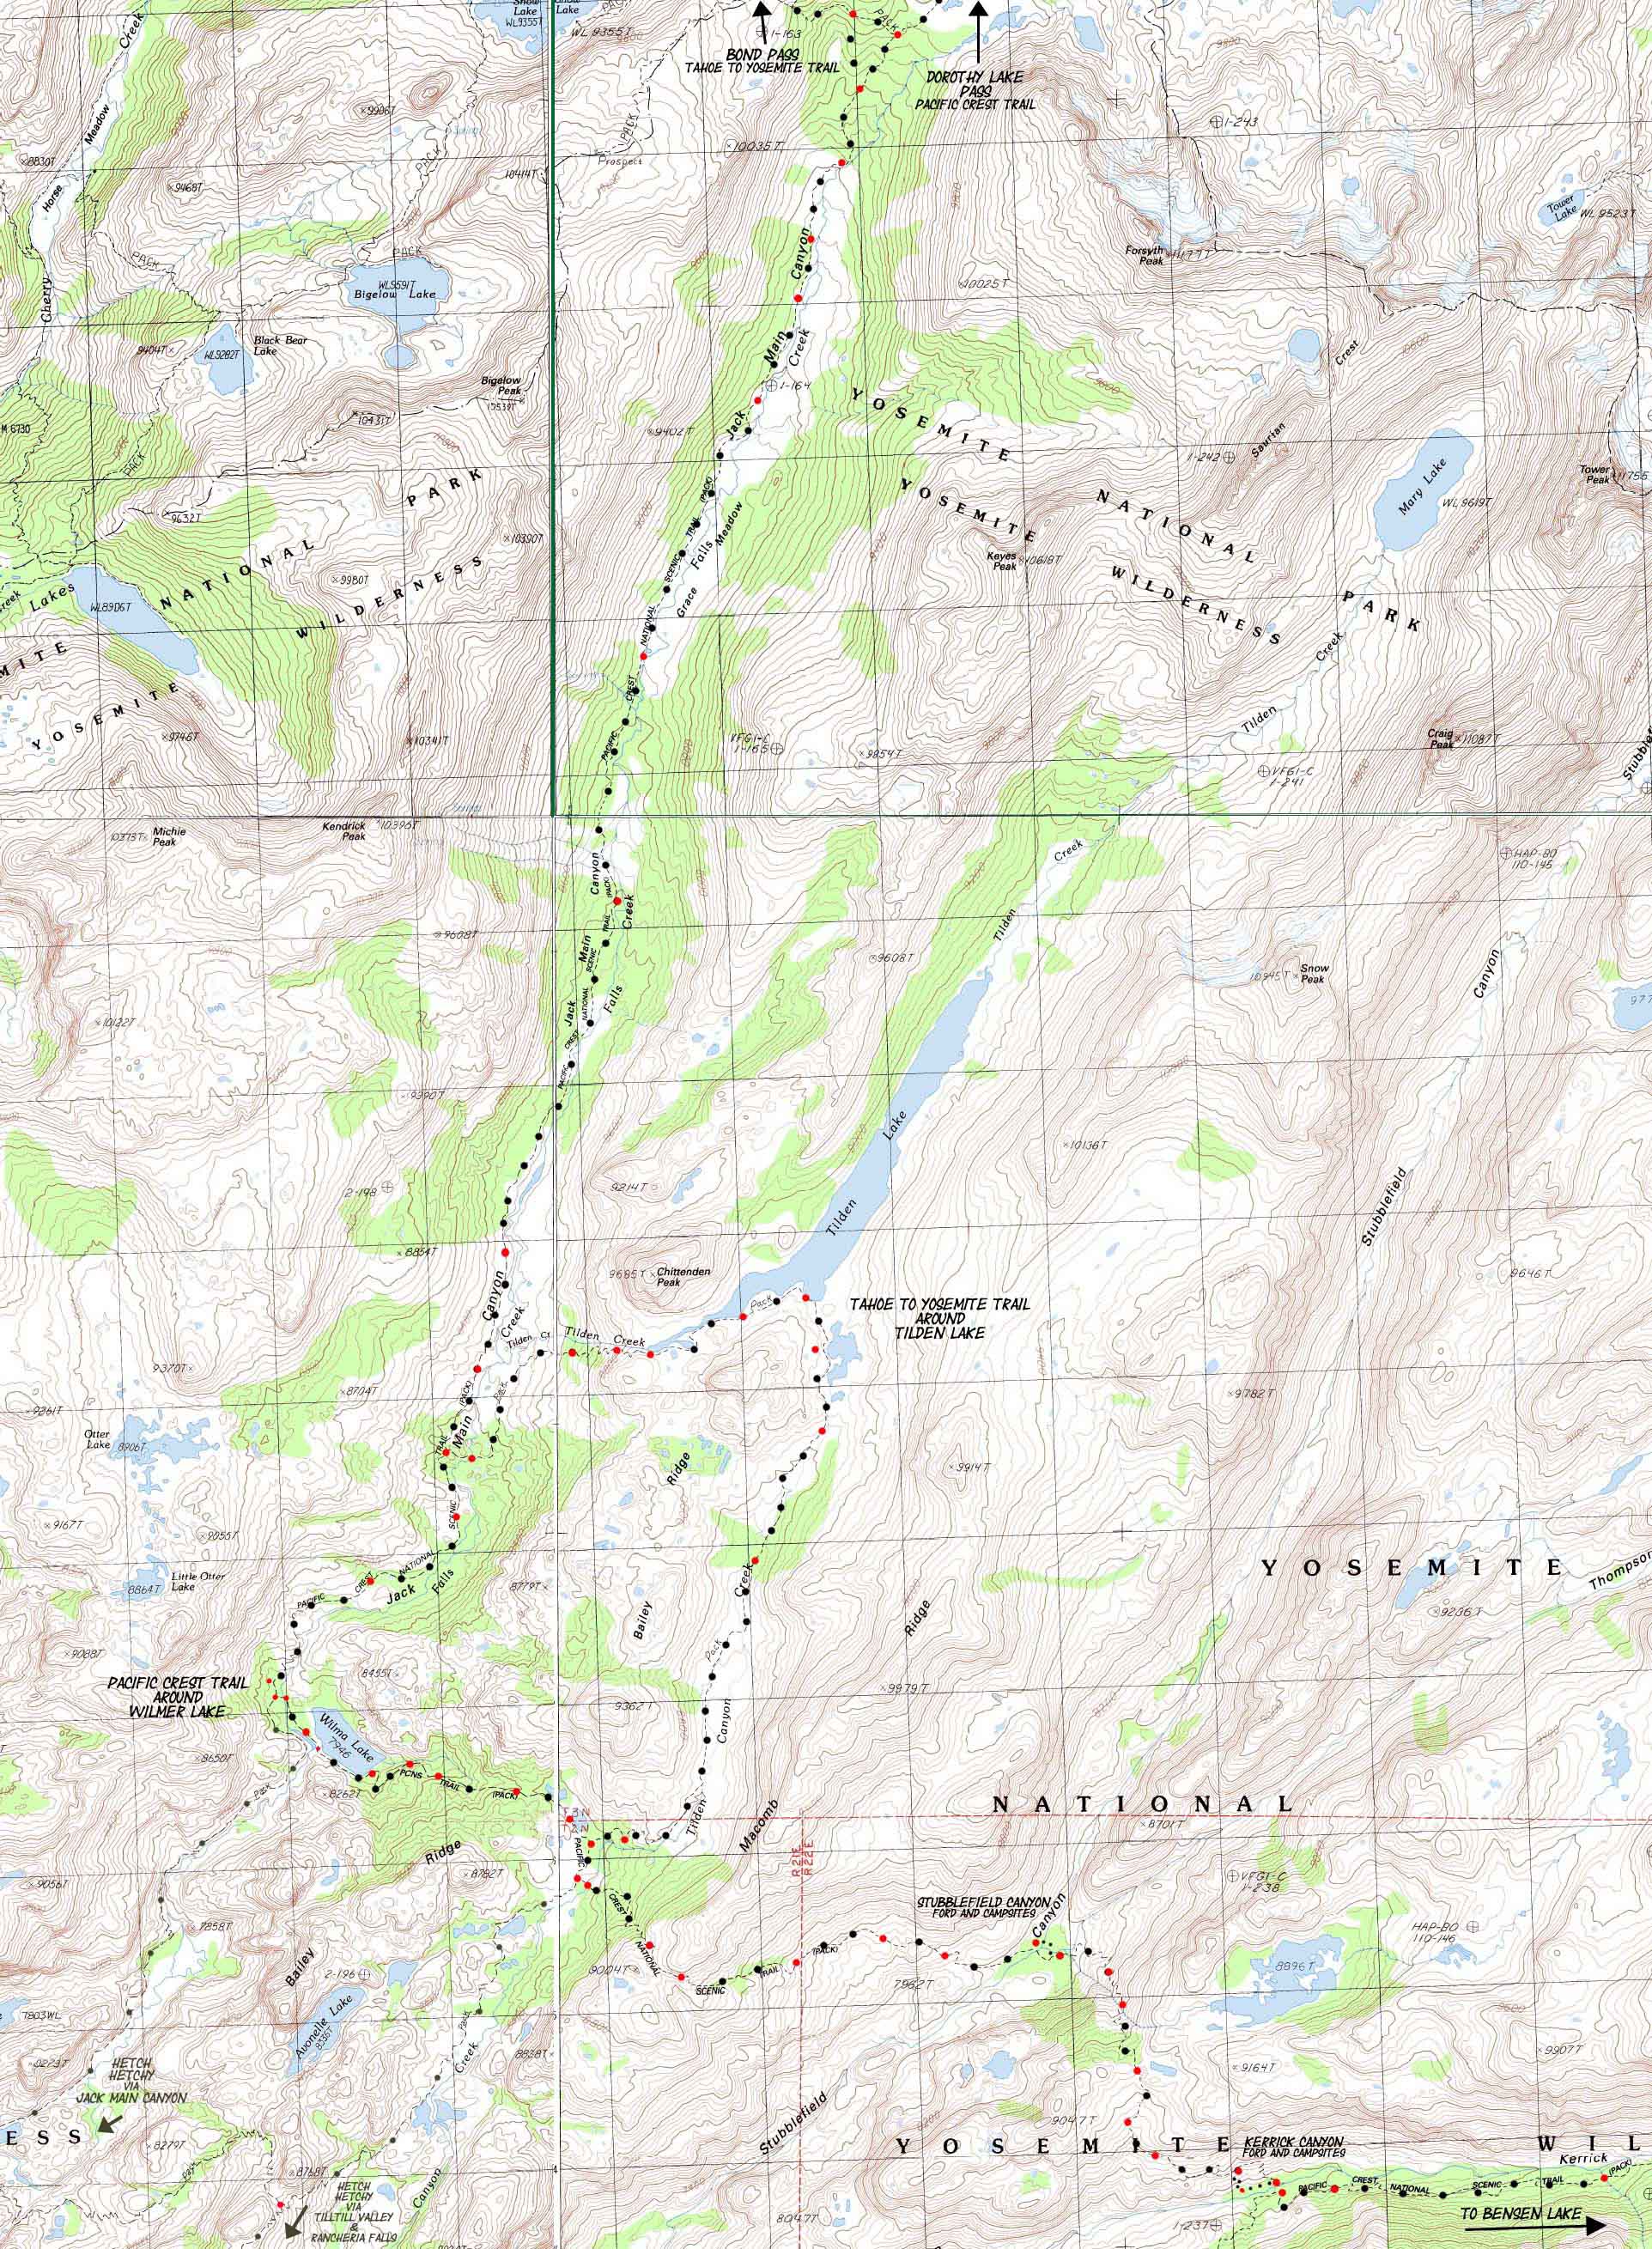 Topo hiking map of Jack Main Canyon with Tilden and Wilmer Lakes in Yosemite.